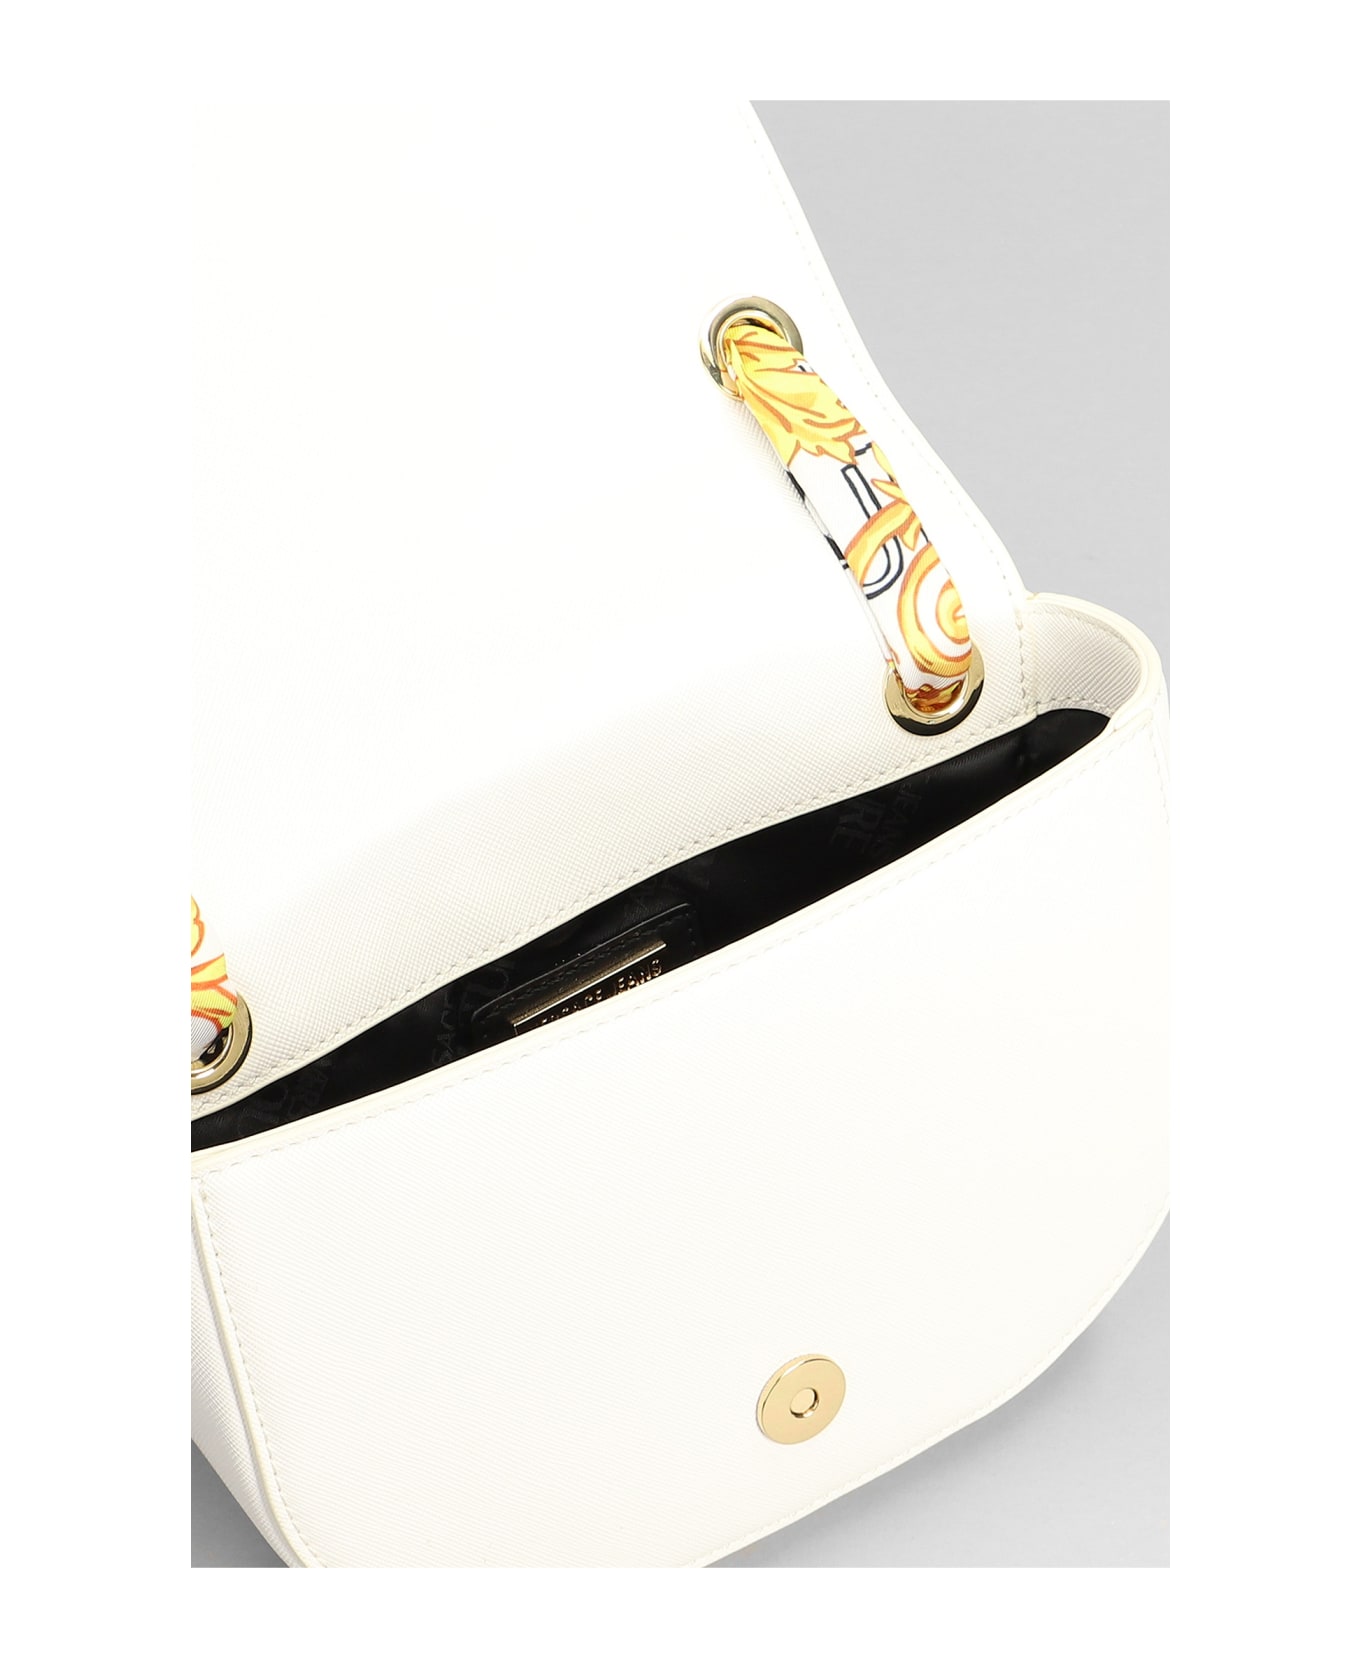 Versace Jeans Couture Bag - White